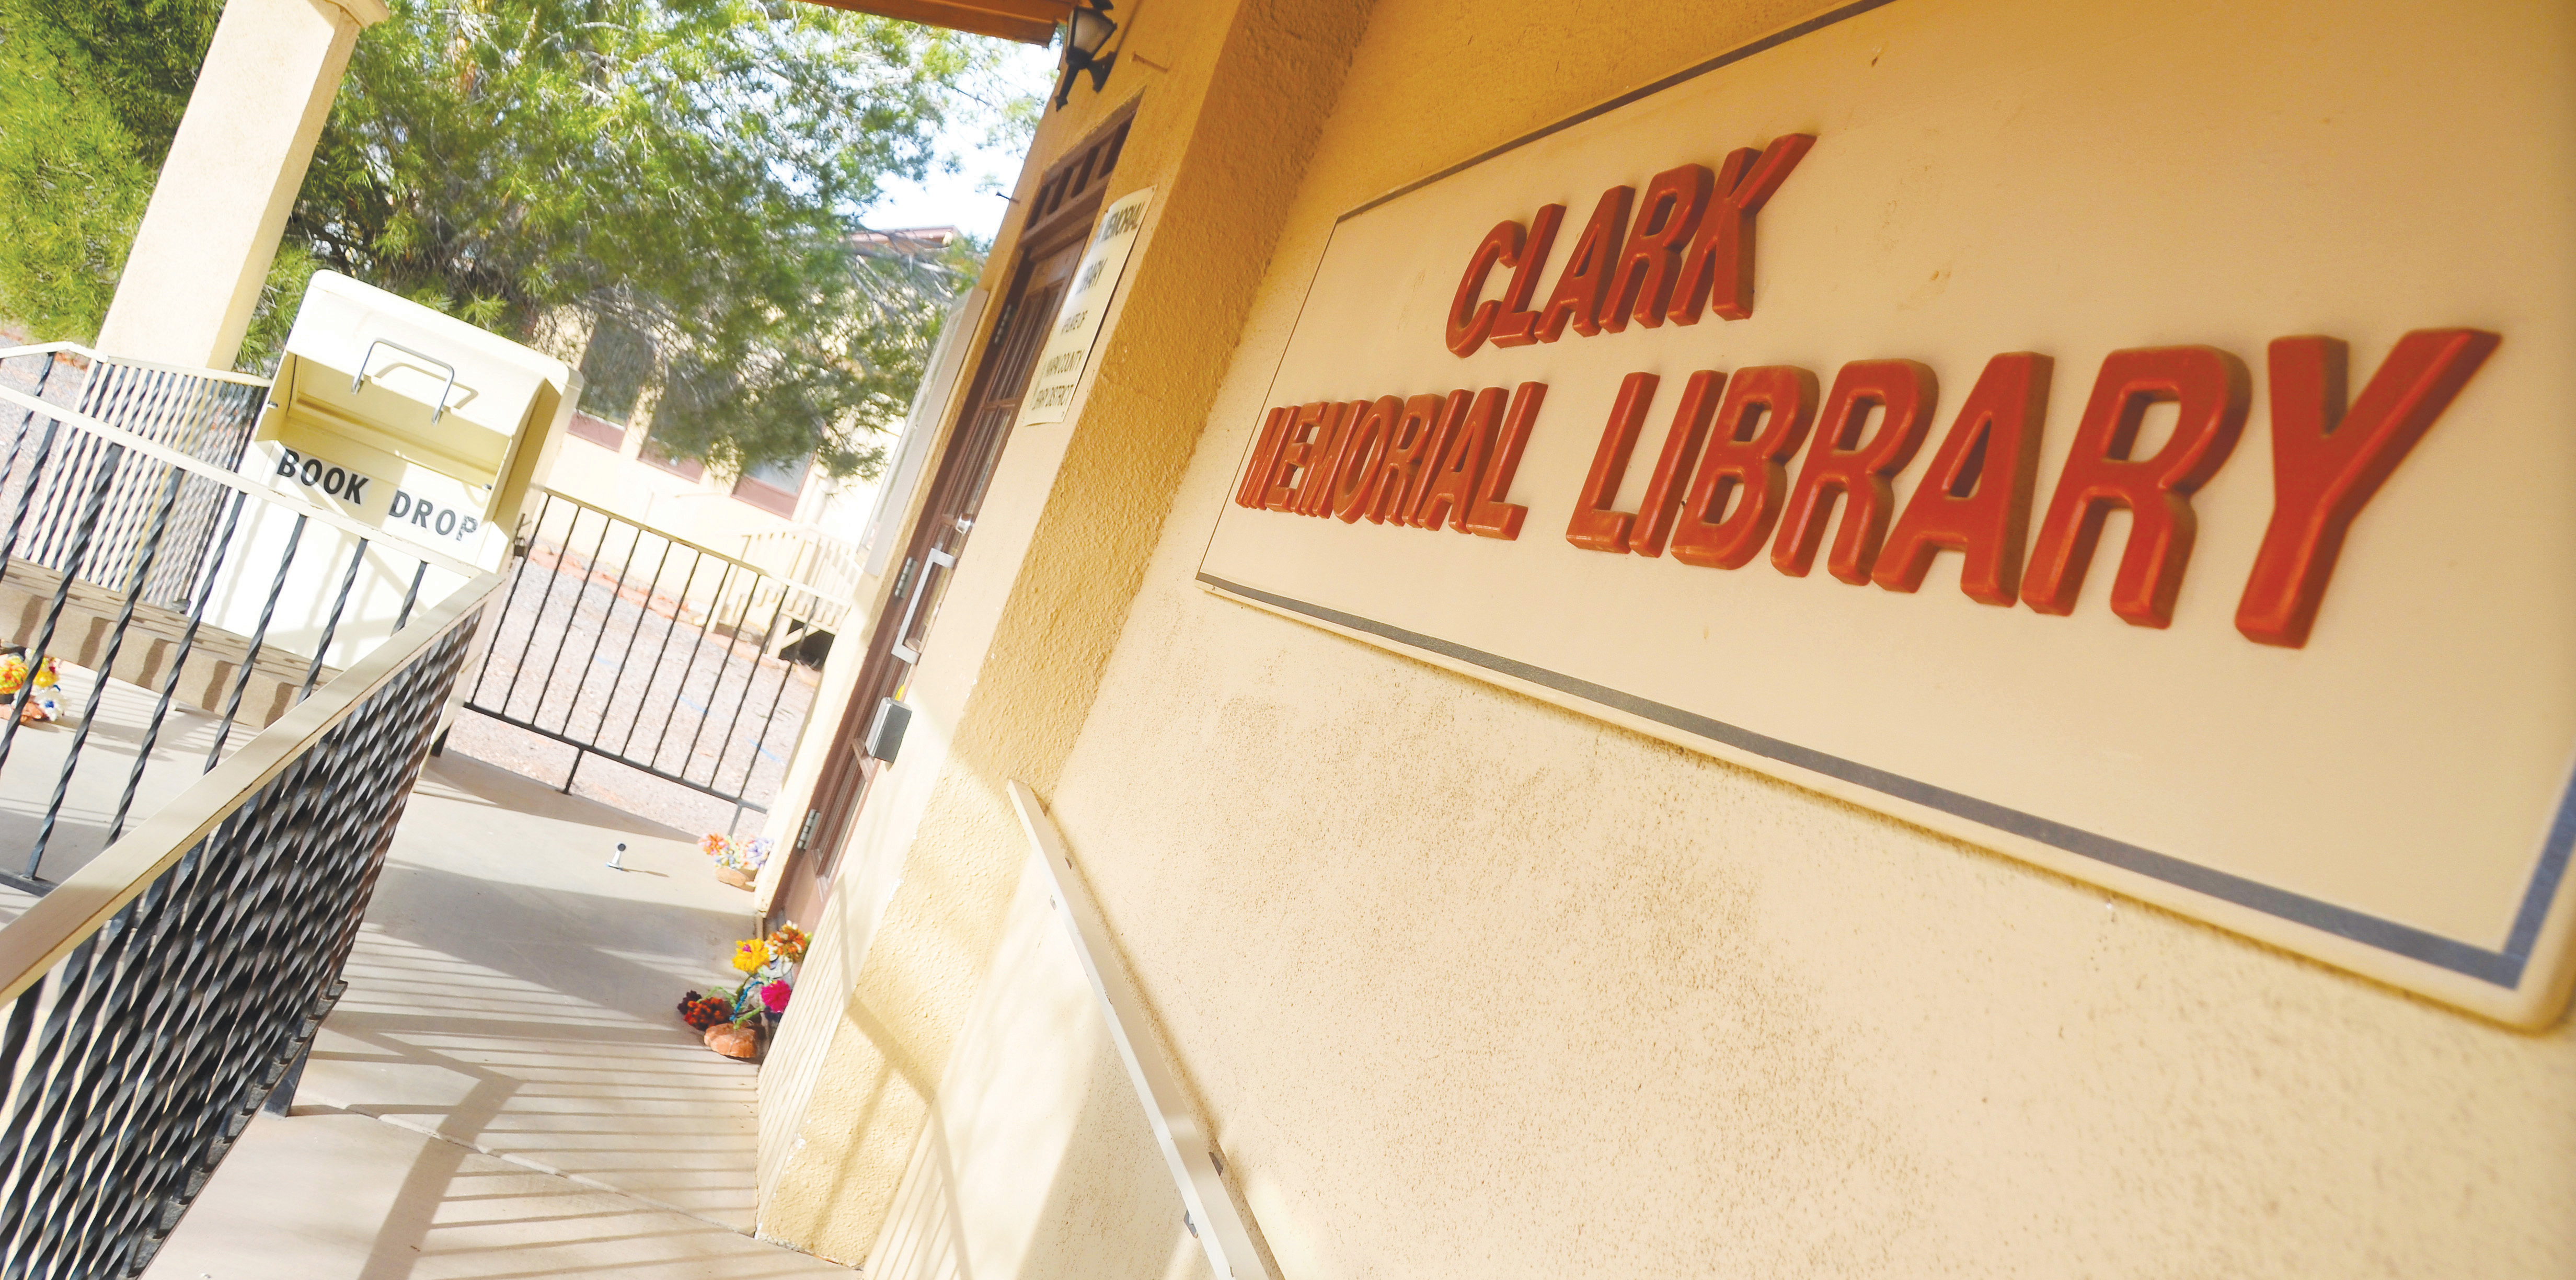 Plan in the works to reopen Clark Memorial Library The Verde